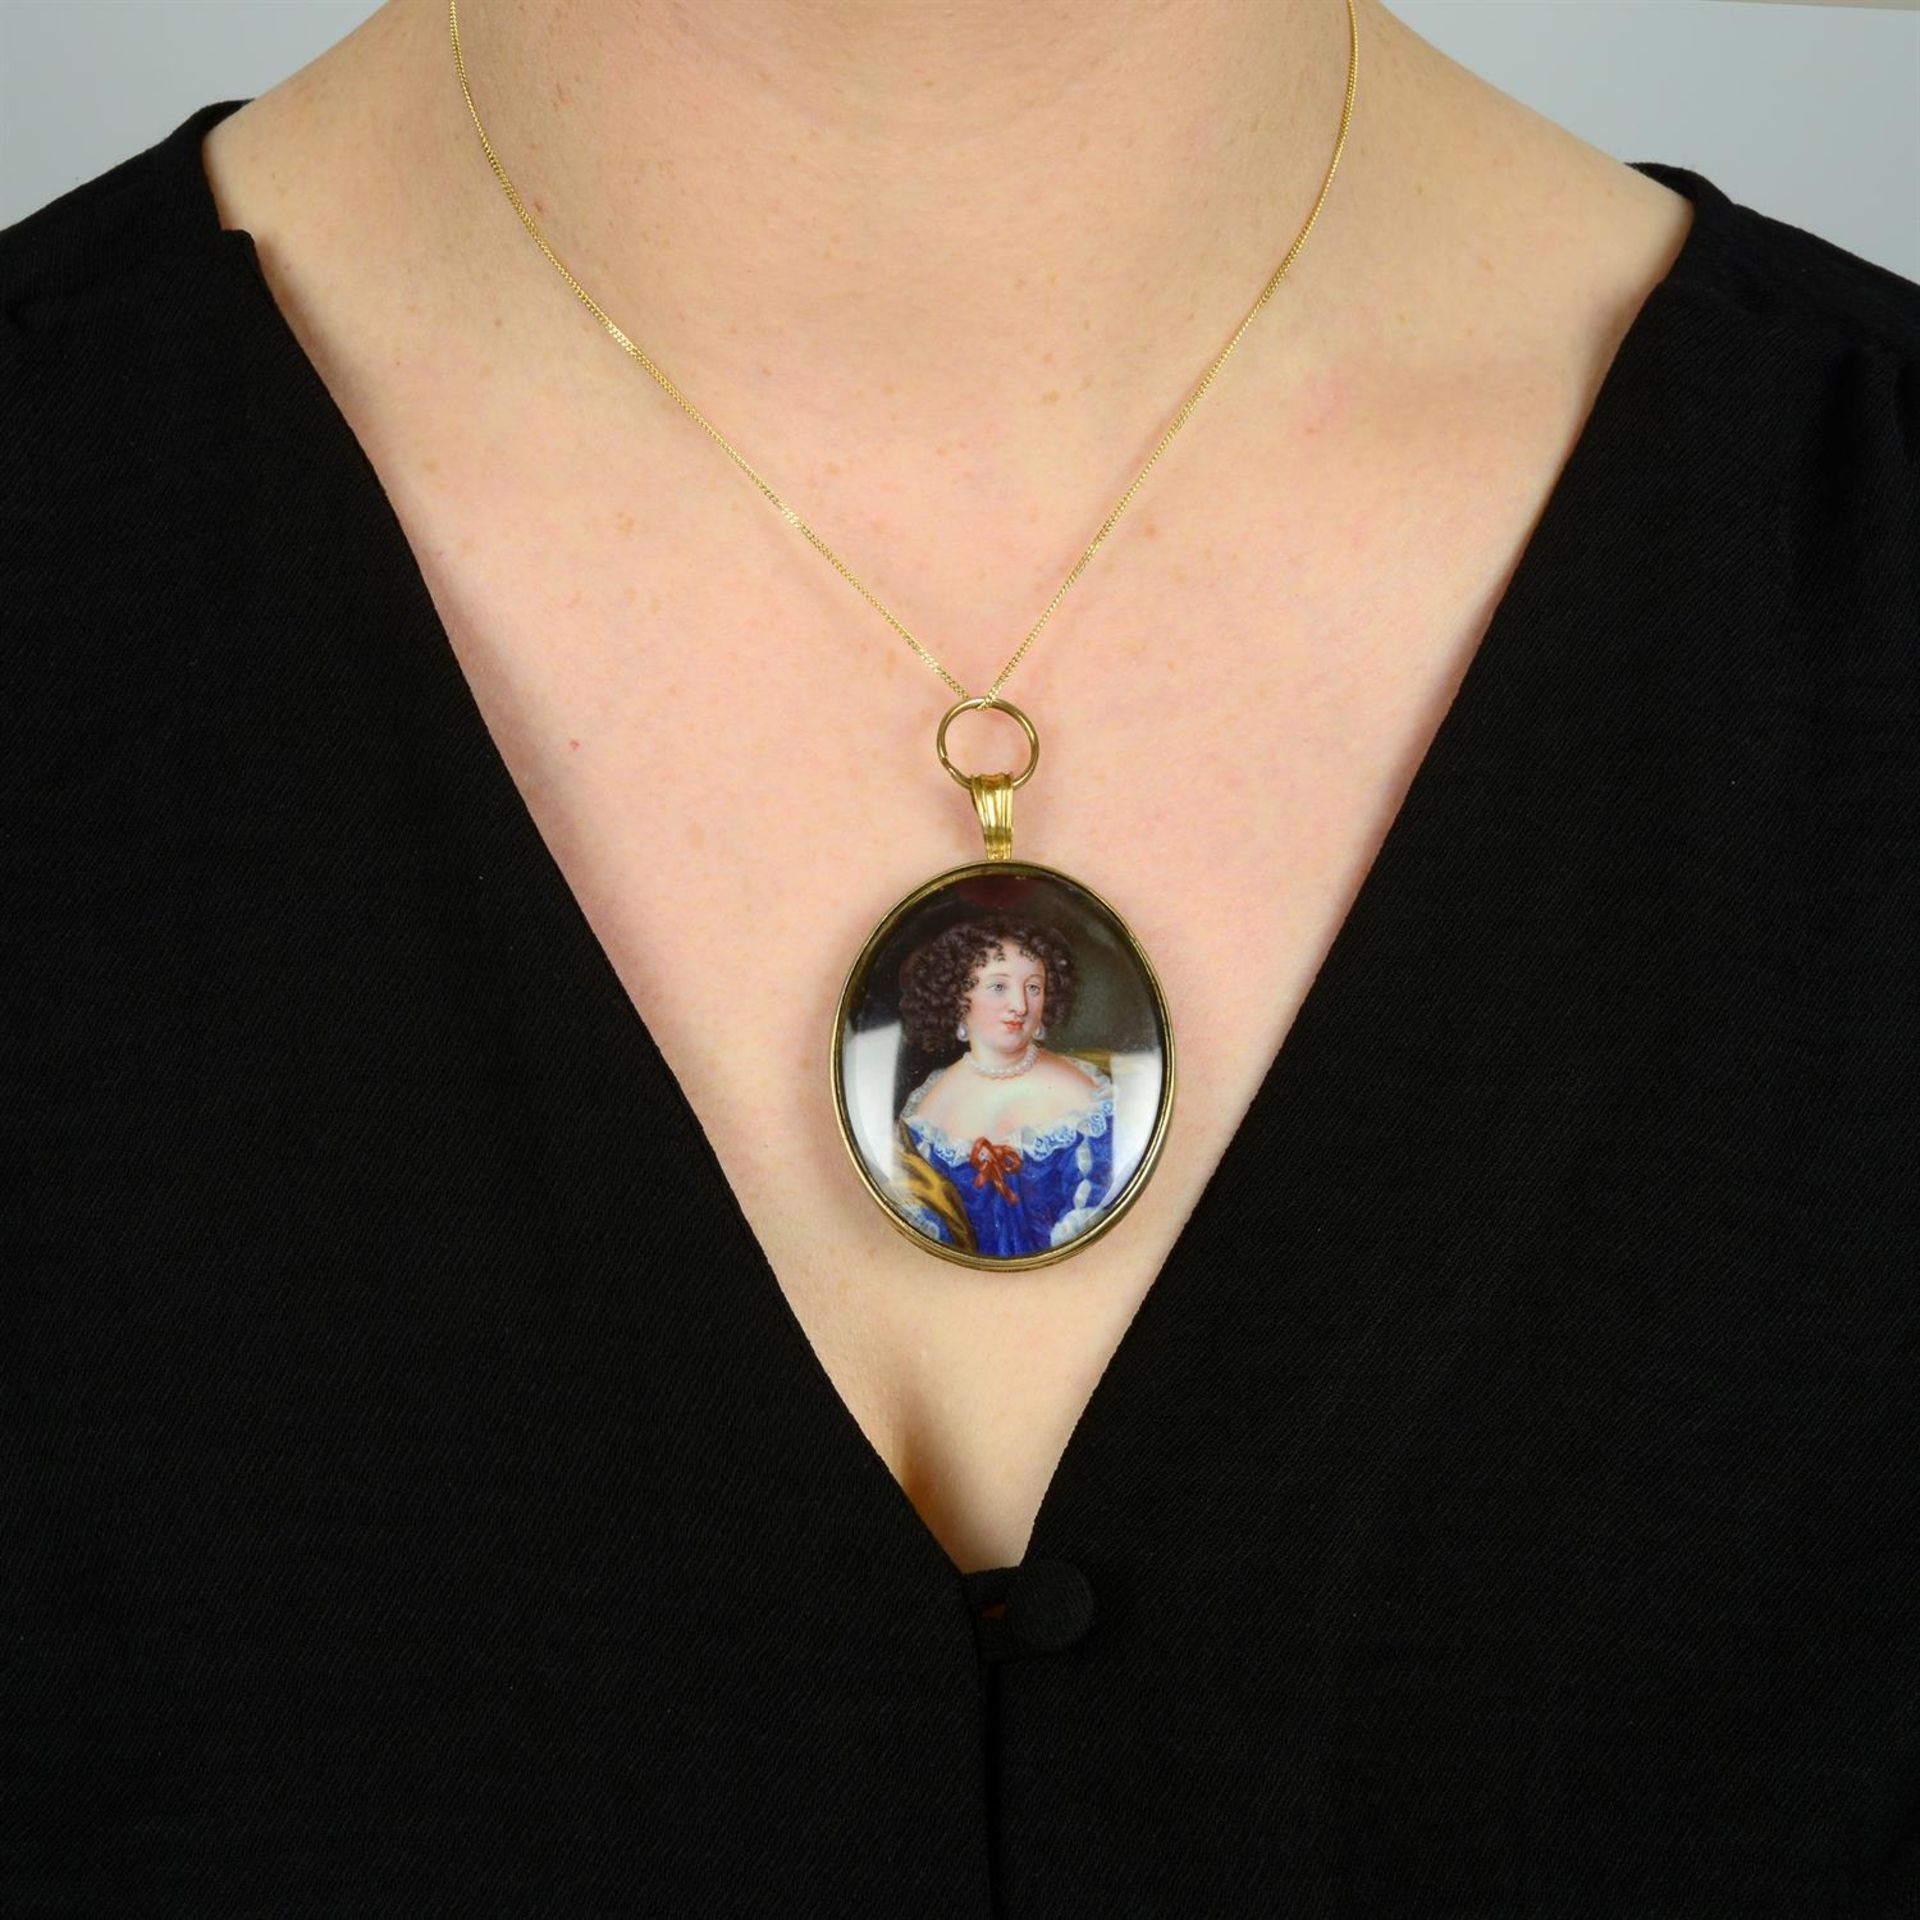 A 19th century portrait miniature pendant, depicting a lady in blue dress. - Image 4 of 4